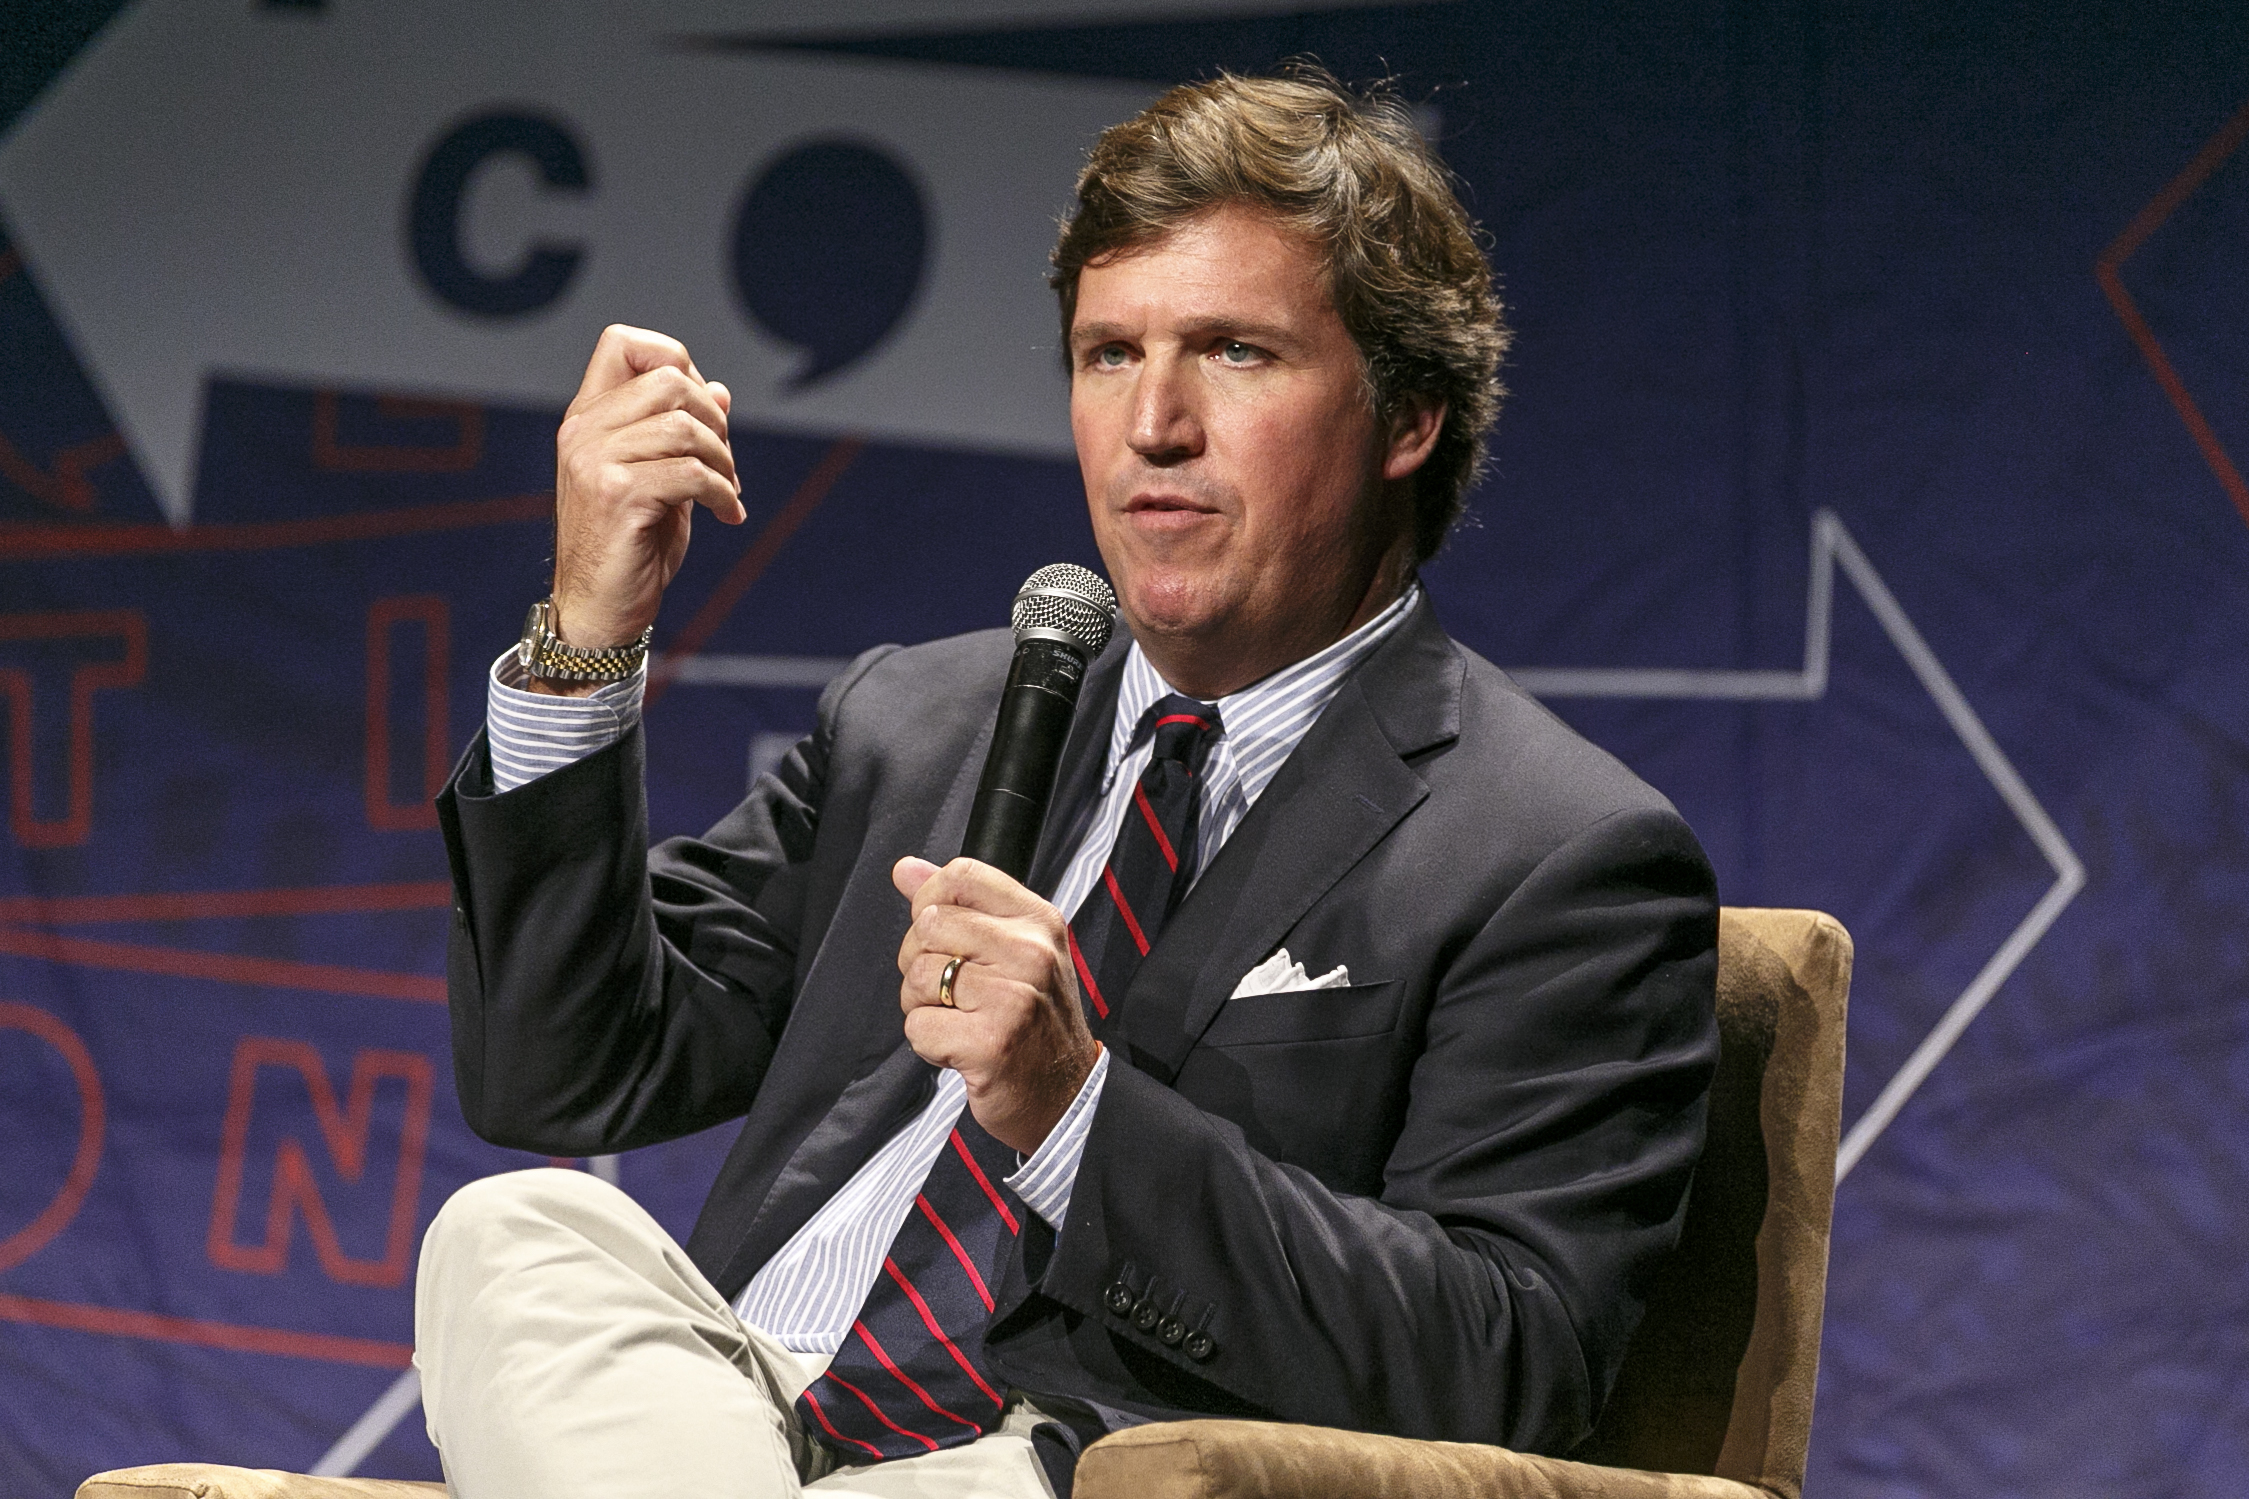 Tucker Carlson speaks onstage during Politicon 2018 at Los Angeles Convention Center on Oct. 21, 2018. (Rich Polk—Politicon/Getty Images)